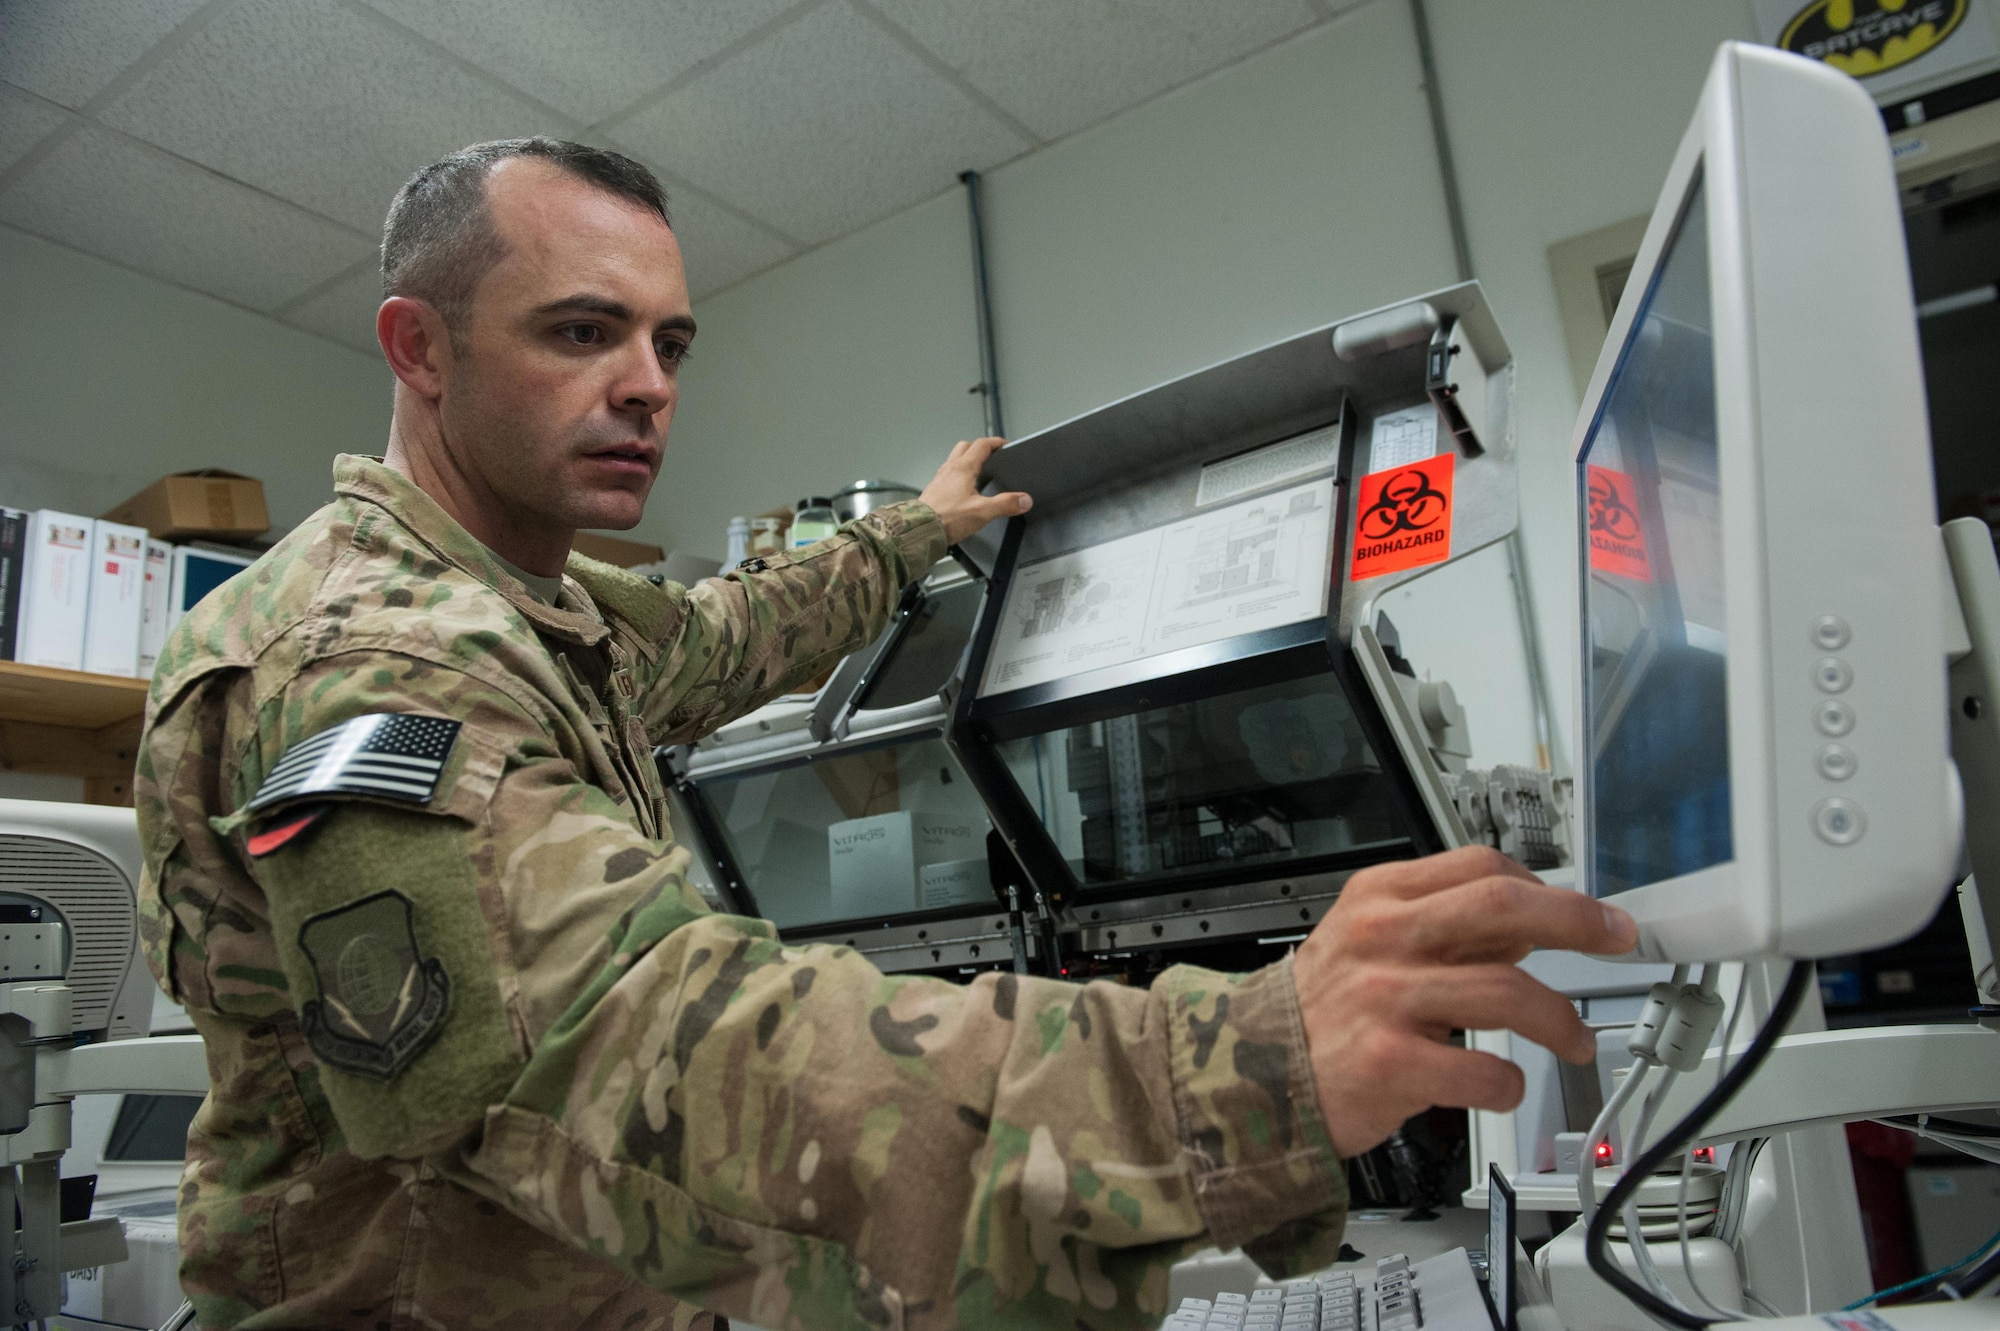 U.S. Air Force Tech. Sgt. Scott Hatch, 455th Expeditionary Medical Group biomedical equipment technician and Craig Joint Theater Hospital facility manager, performs maintenance on a blood testing machine at Bagram Airfield, Afghanistan, Sept. 24, 2015. (U.S. Air Force photo by Tech. Sgt. Joseph Swafford/Released) 